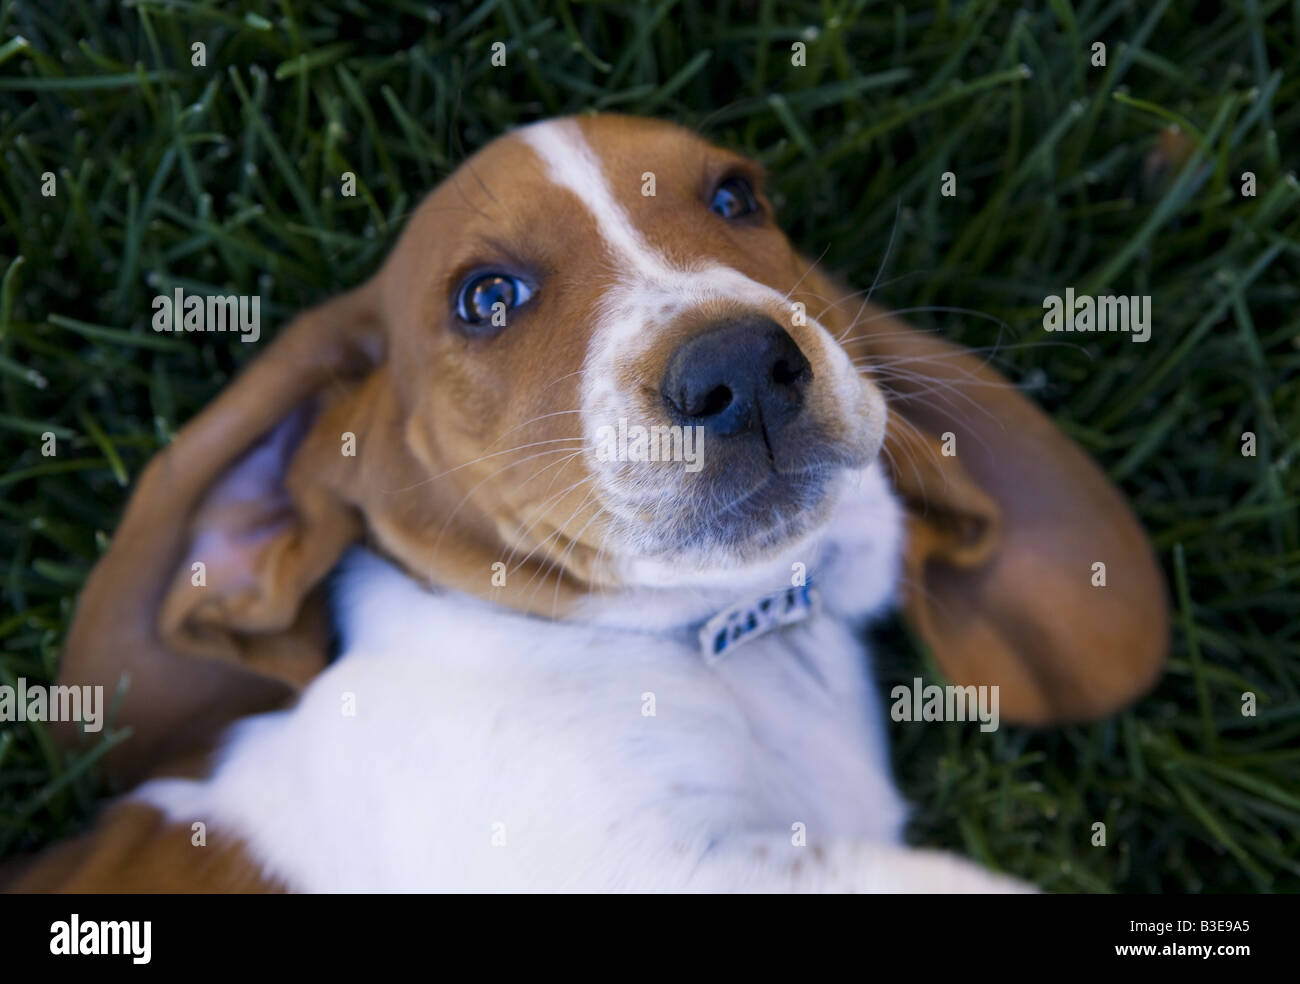 Sweet Basset Hound puppy lying upside down outdoors in green grass Stock Photo